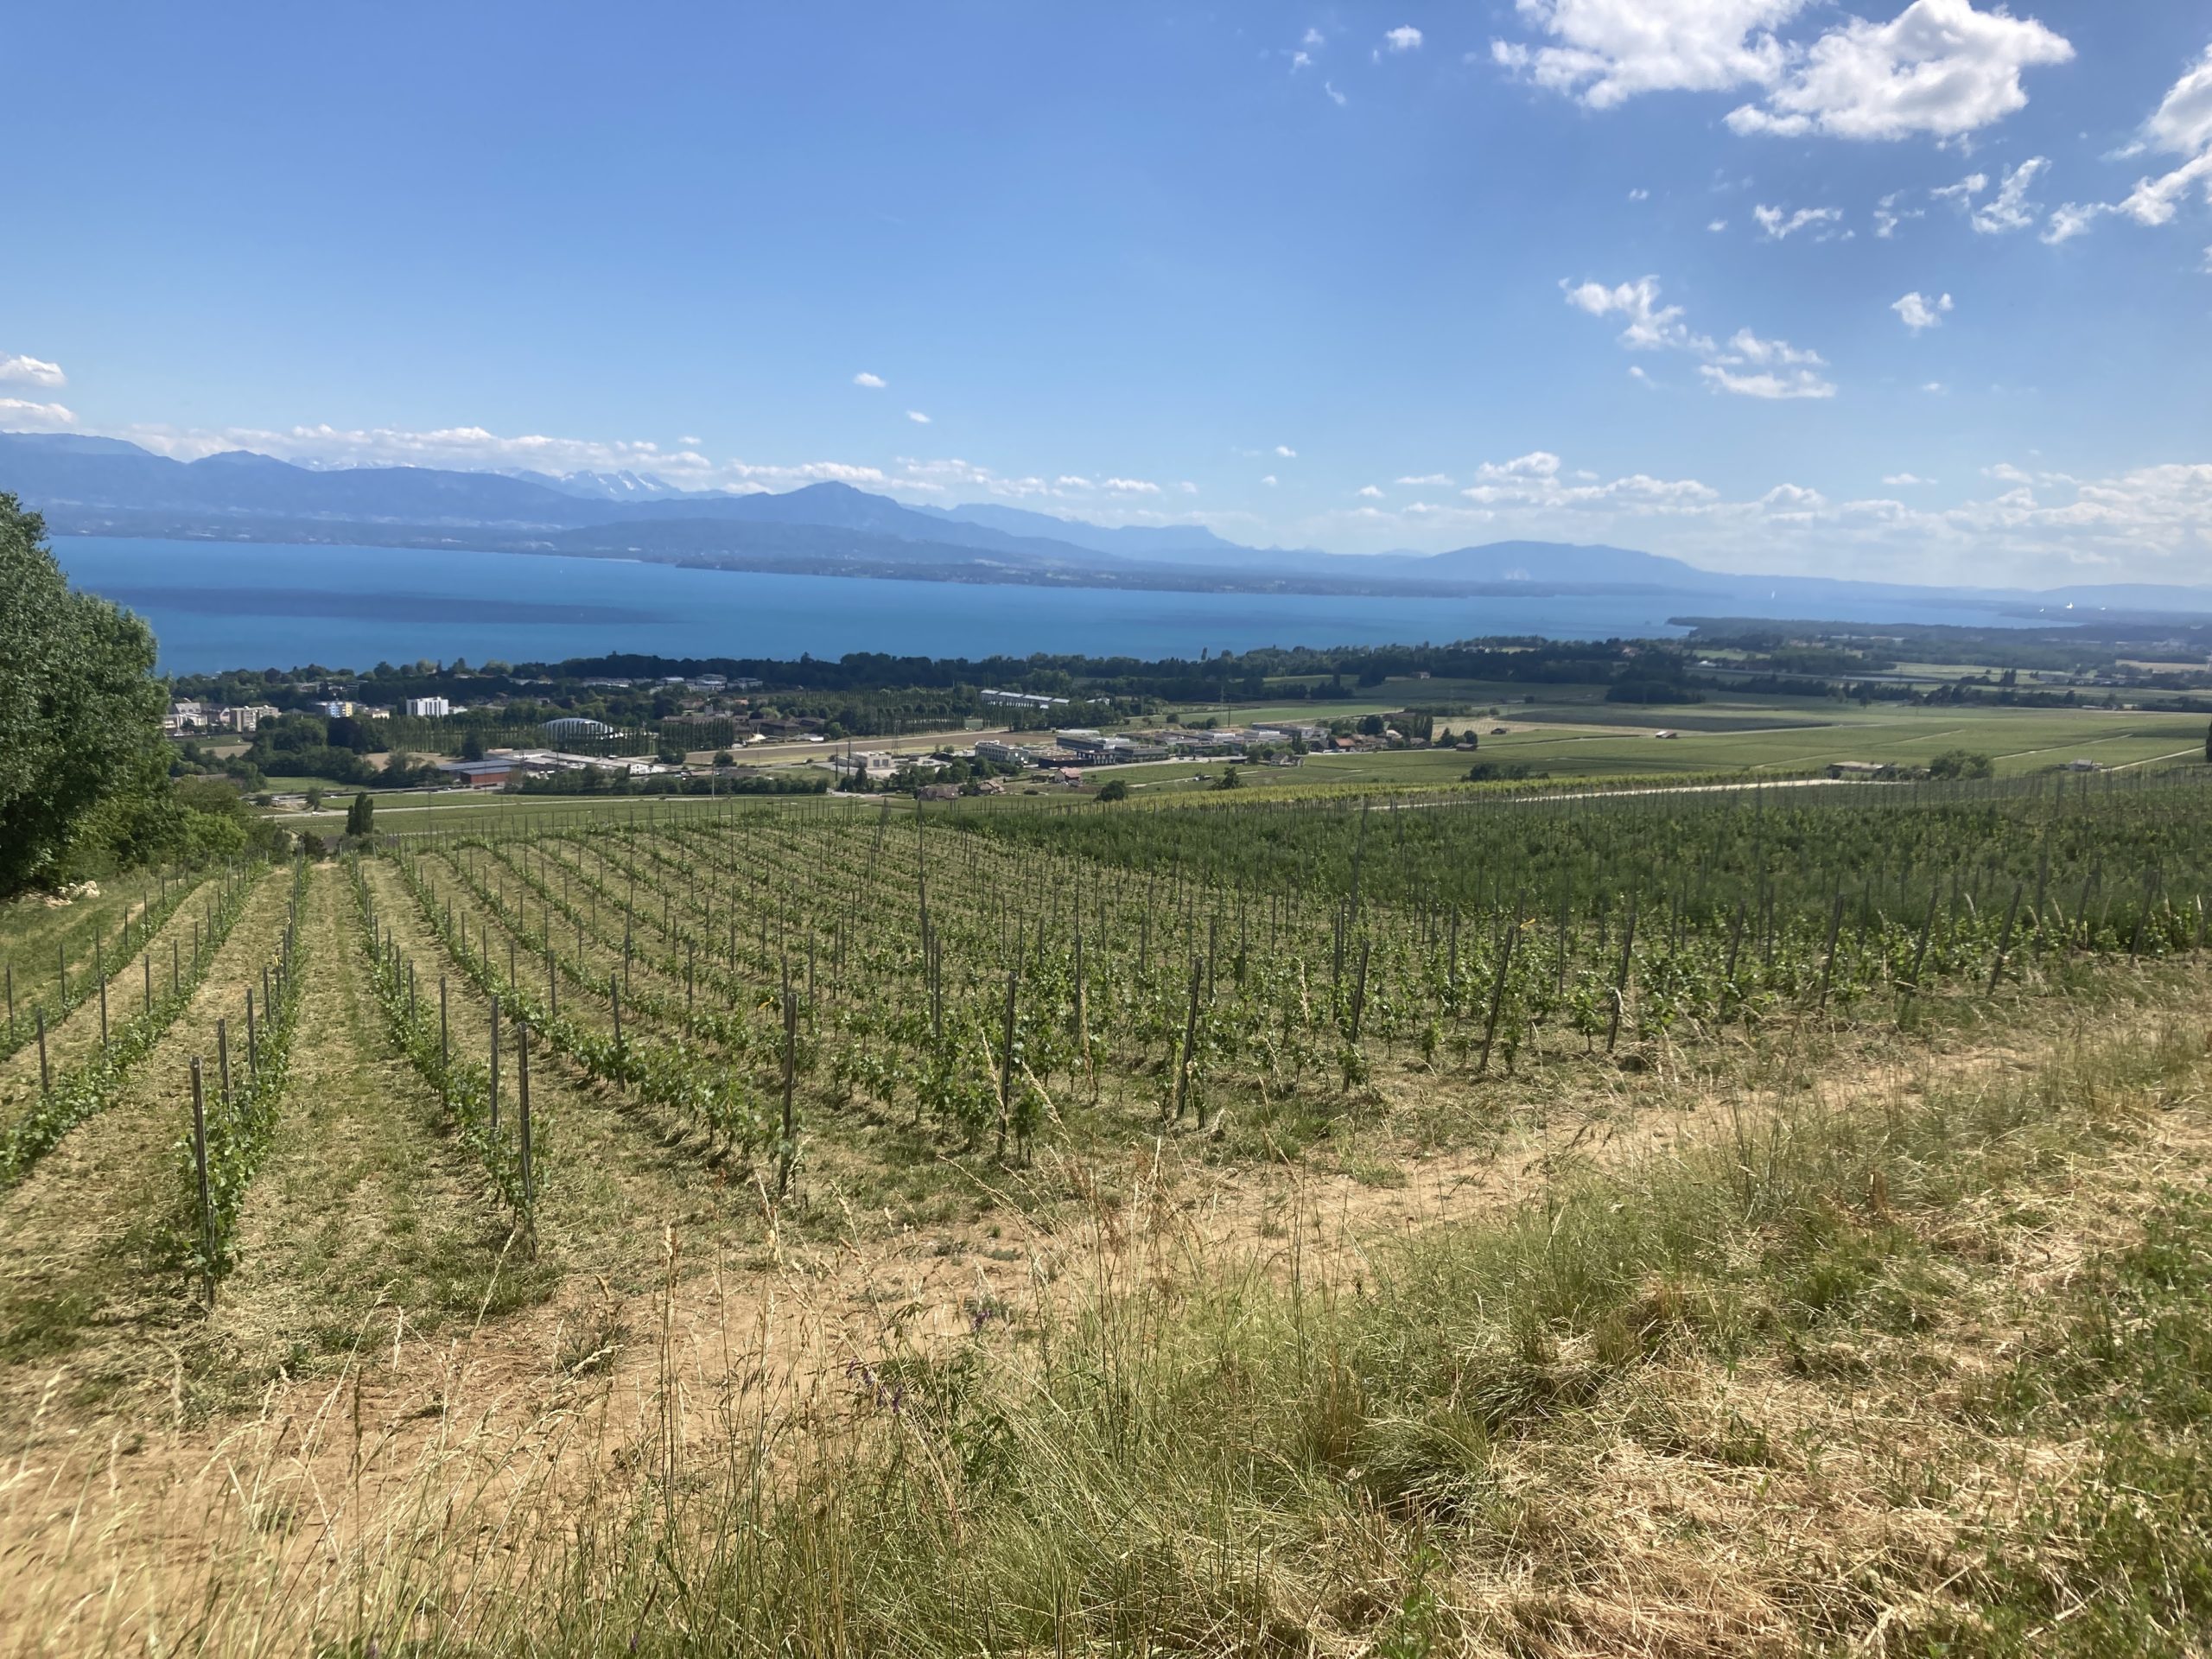 Cycling From Nyon To the Signal De Bougy and Back